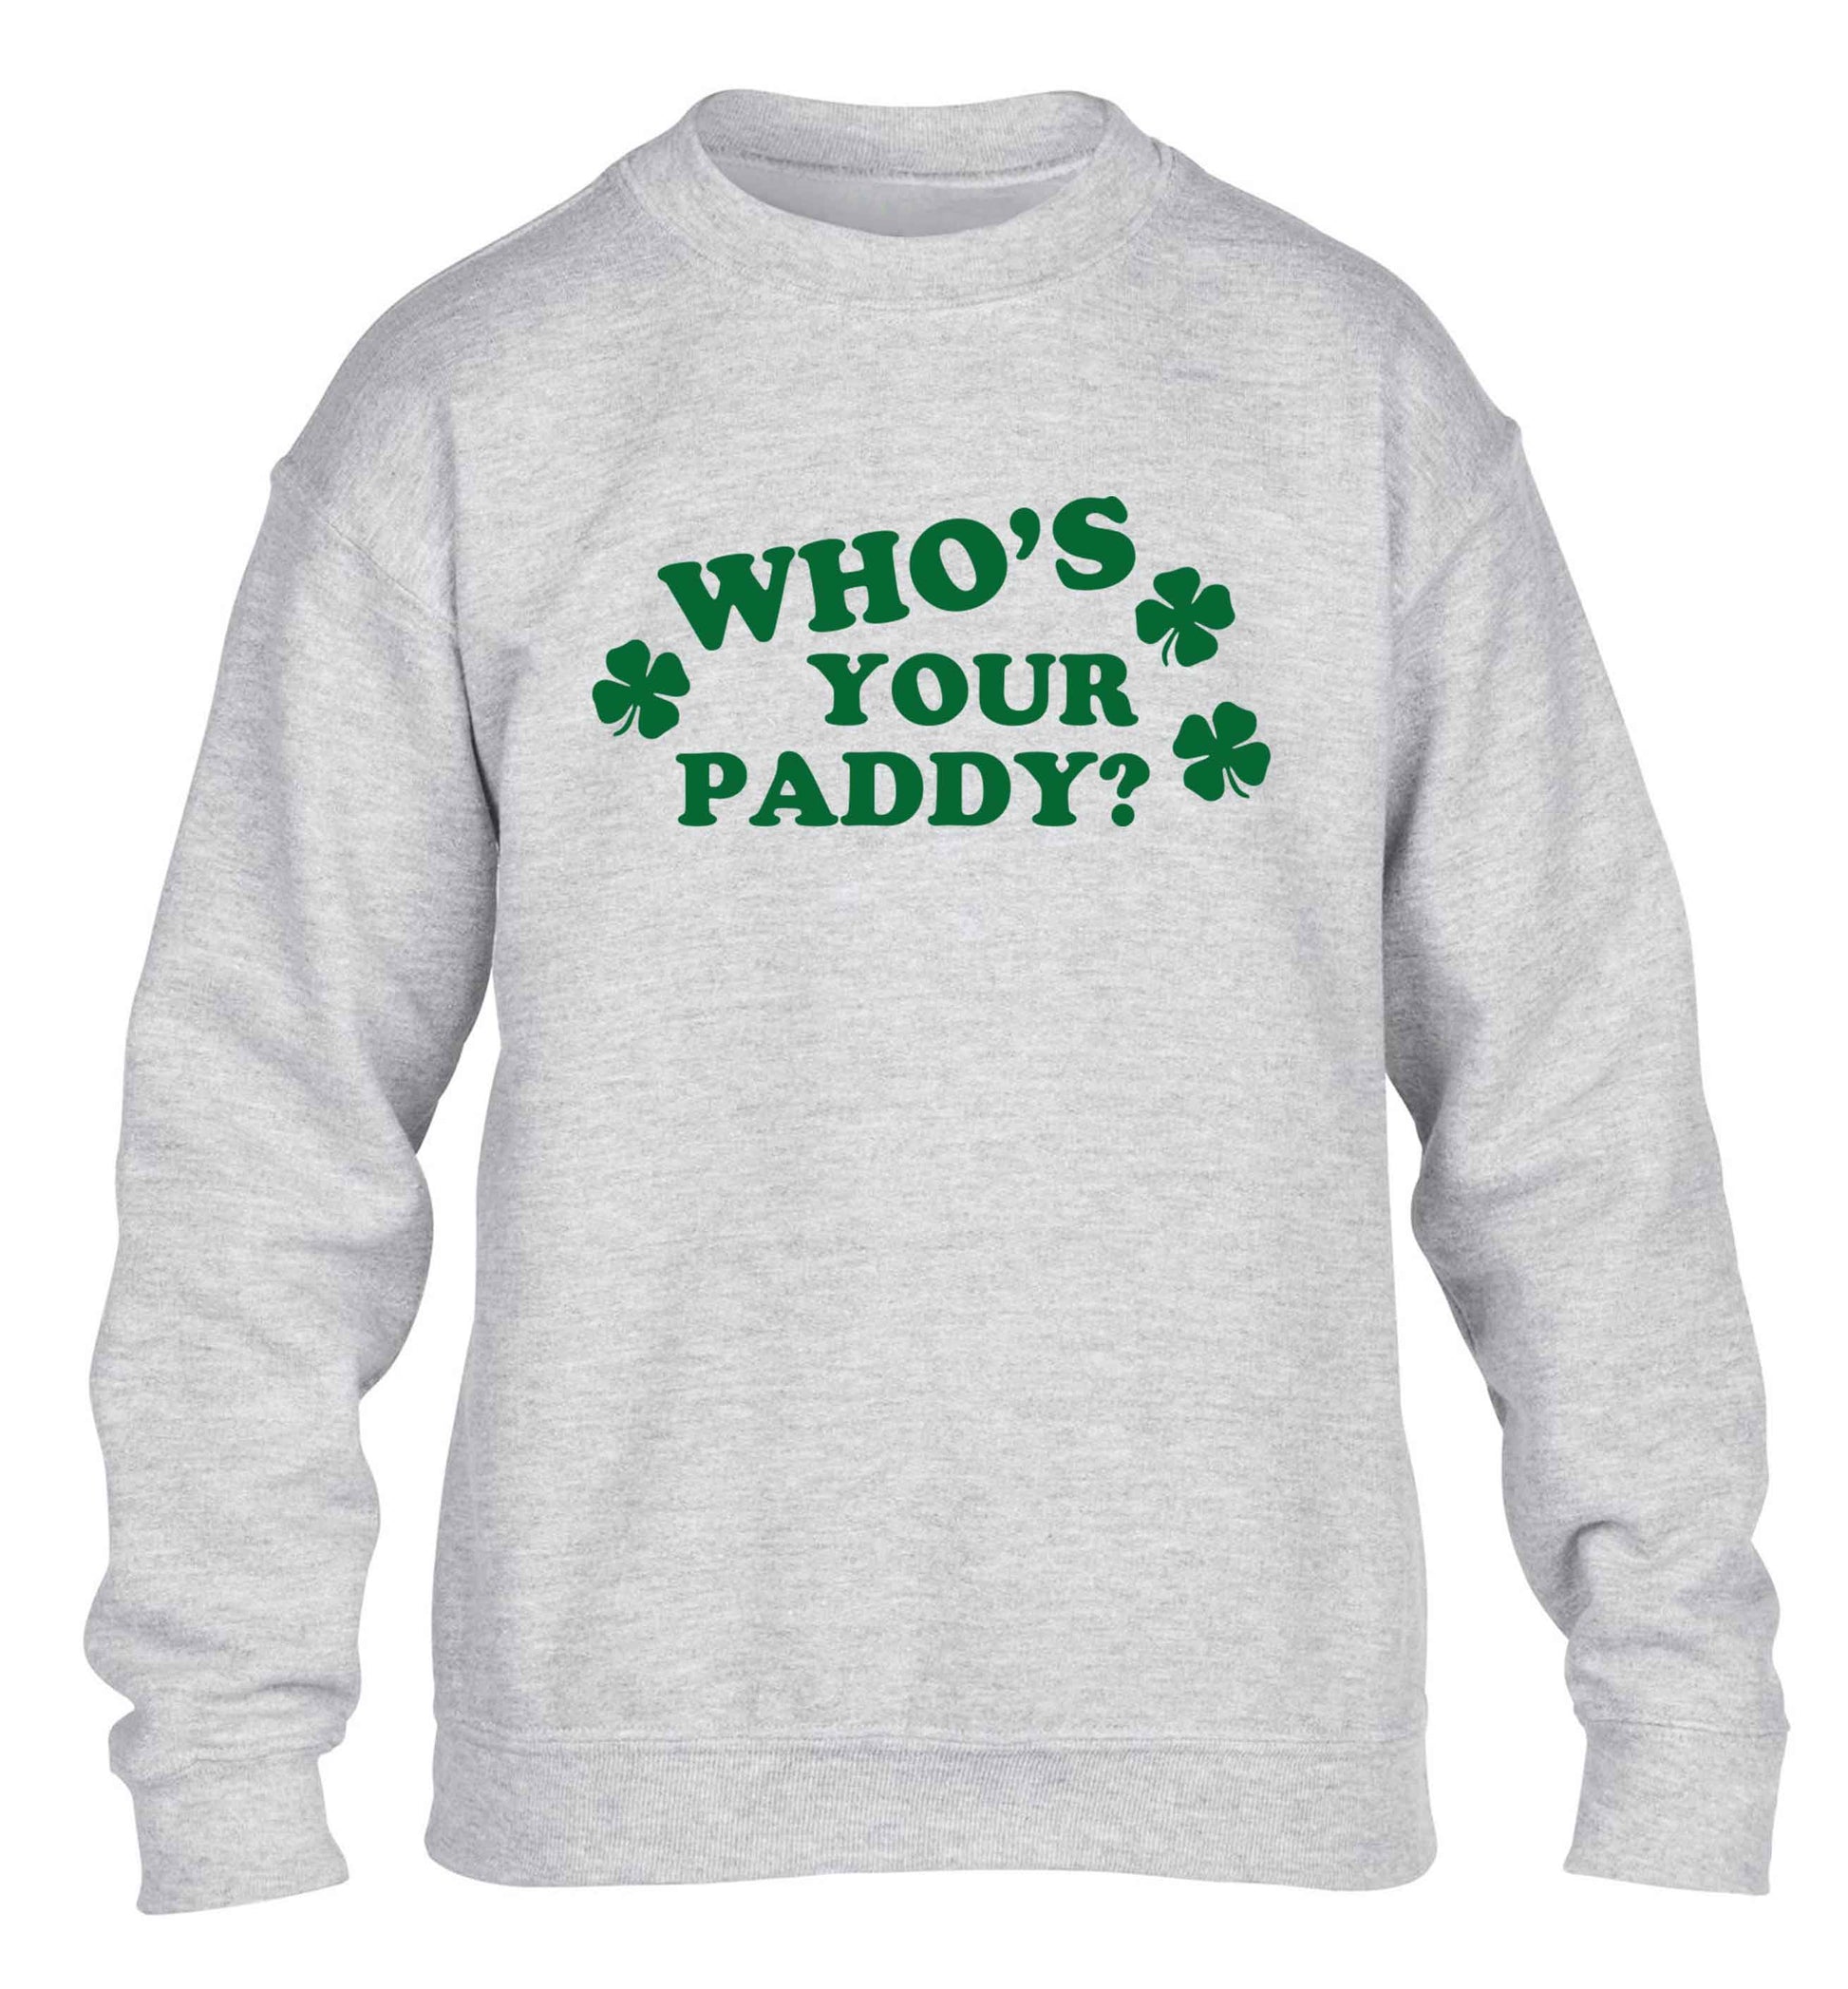 Who's your paddy? children's grey sweater 12-13 Years